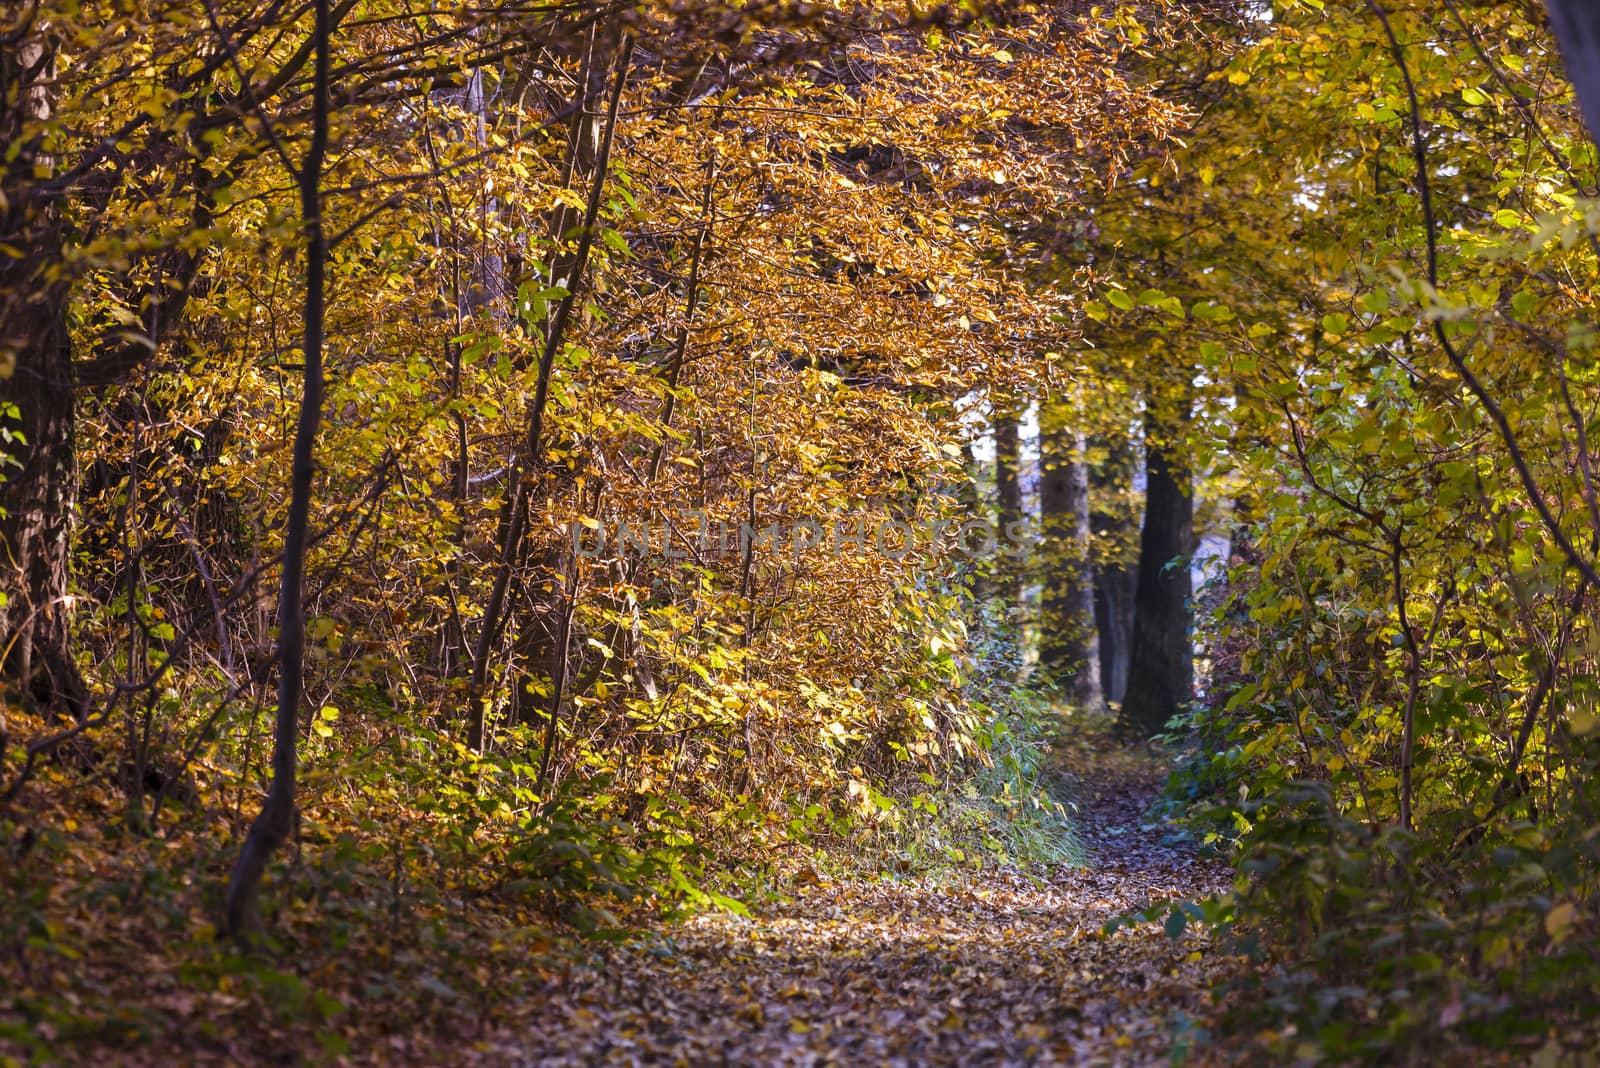 Trail through the woods in autumn by asafaric